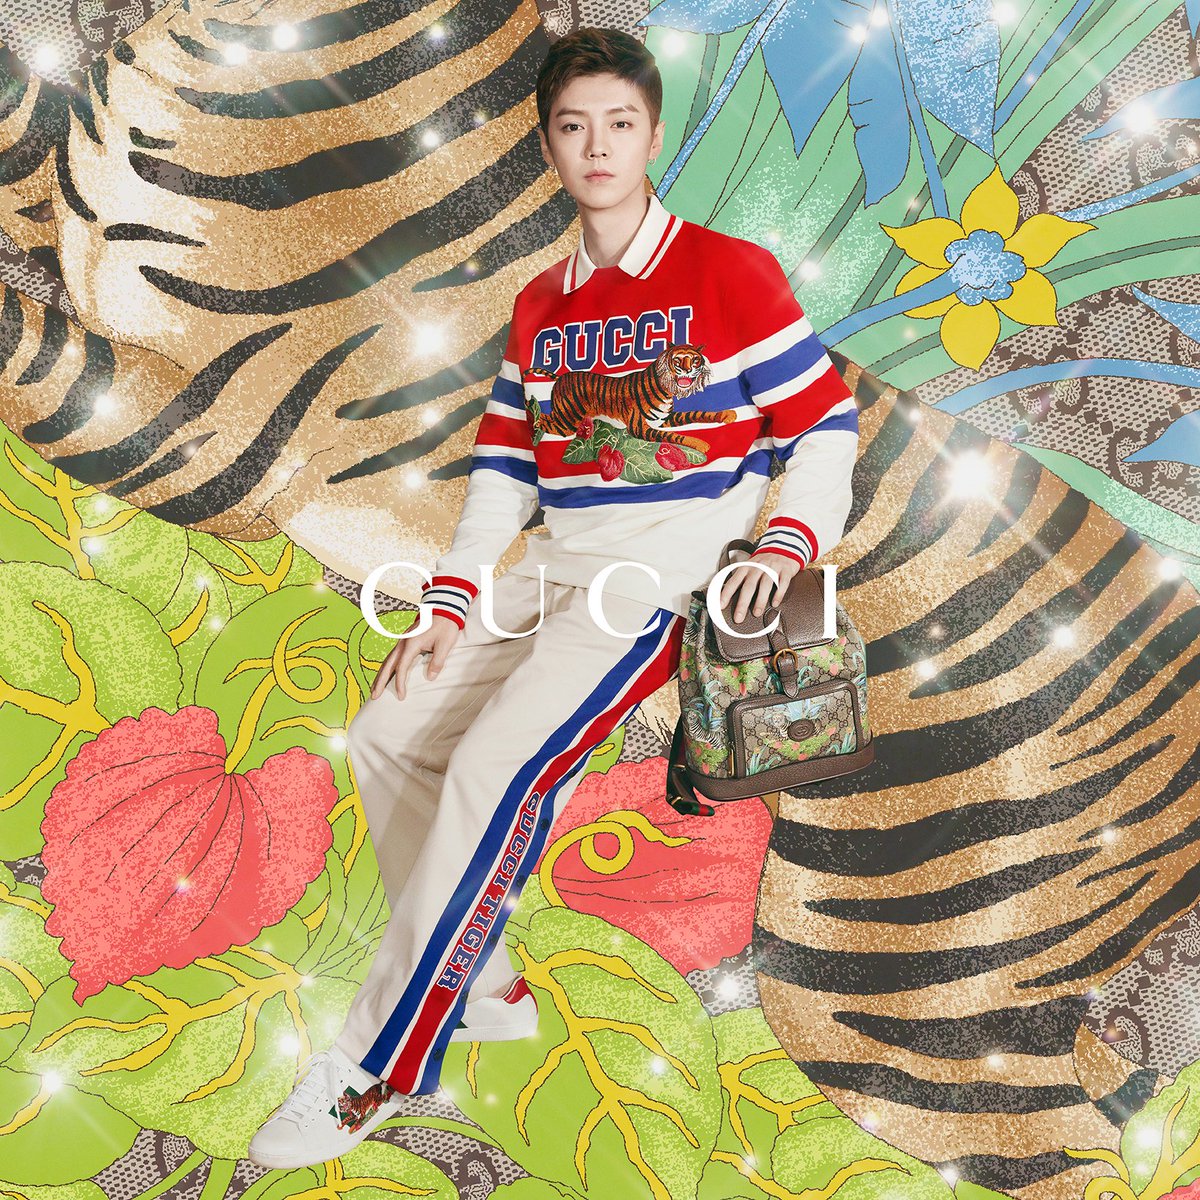 Against an illustrated background of tigers, Global Brand Ambassador #LuHan is photographed by #AngeloPennetta for the second part of the #GucciTiger campaign. Creative Director #AlessandroMichele, Art Director #ChristopherSimmonds. Discover more on.gucci.com/_GucciTiger